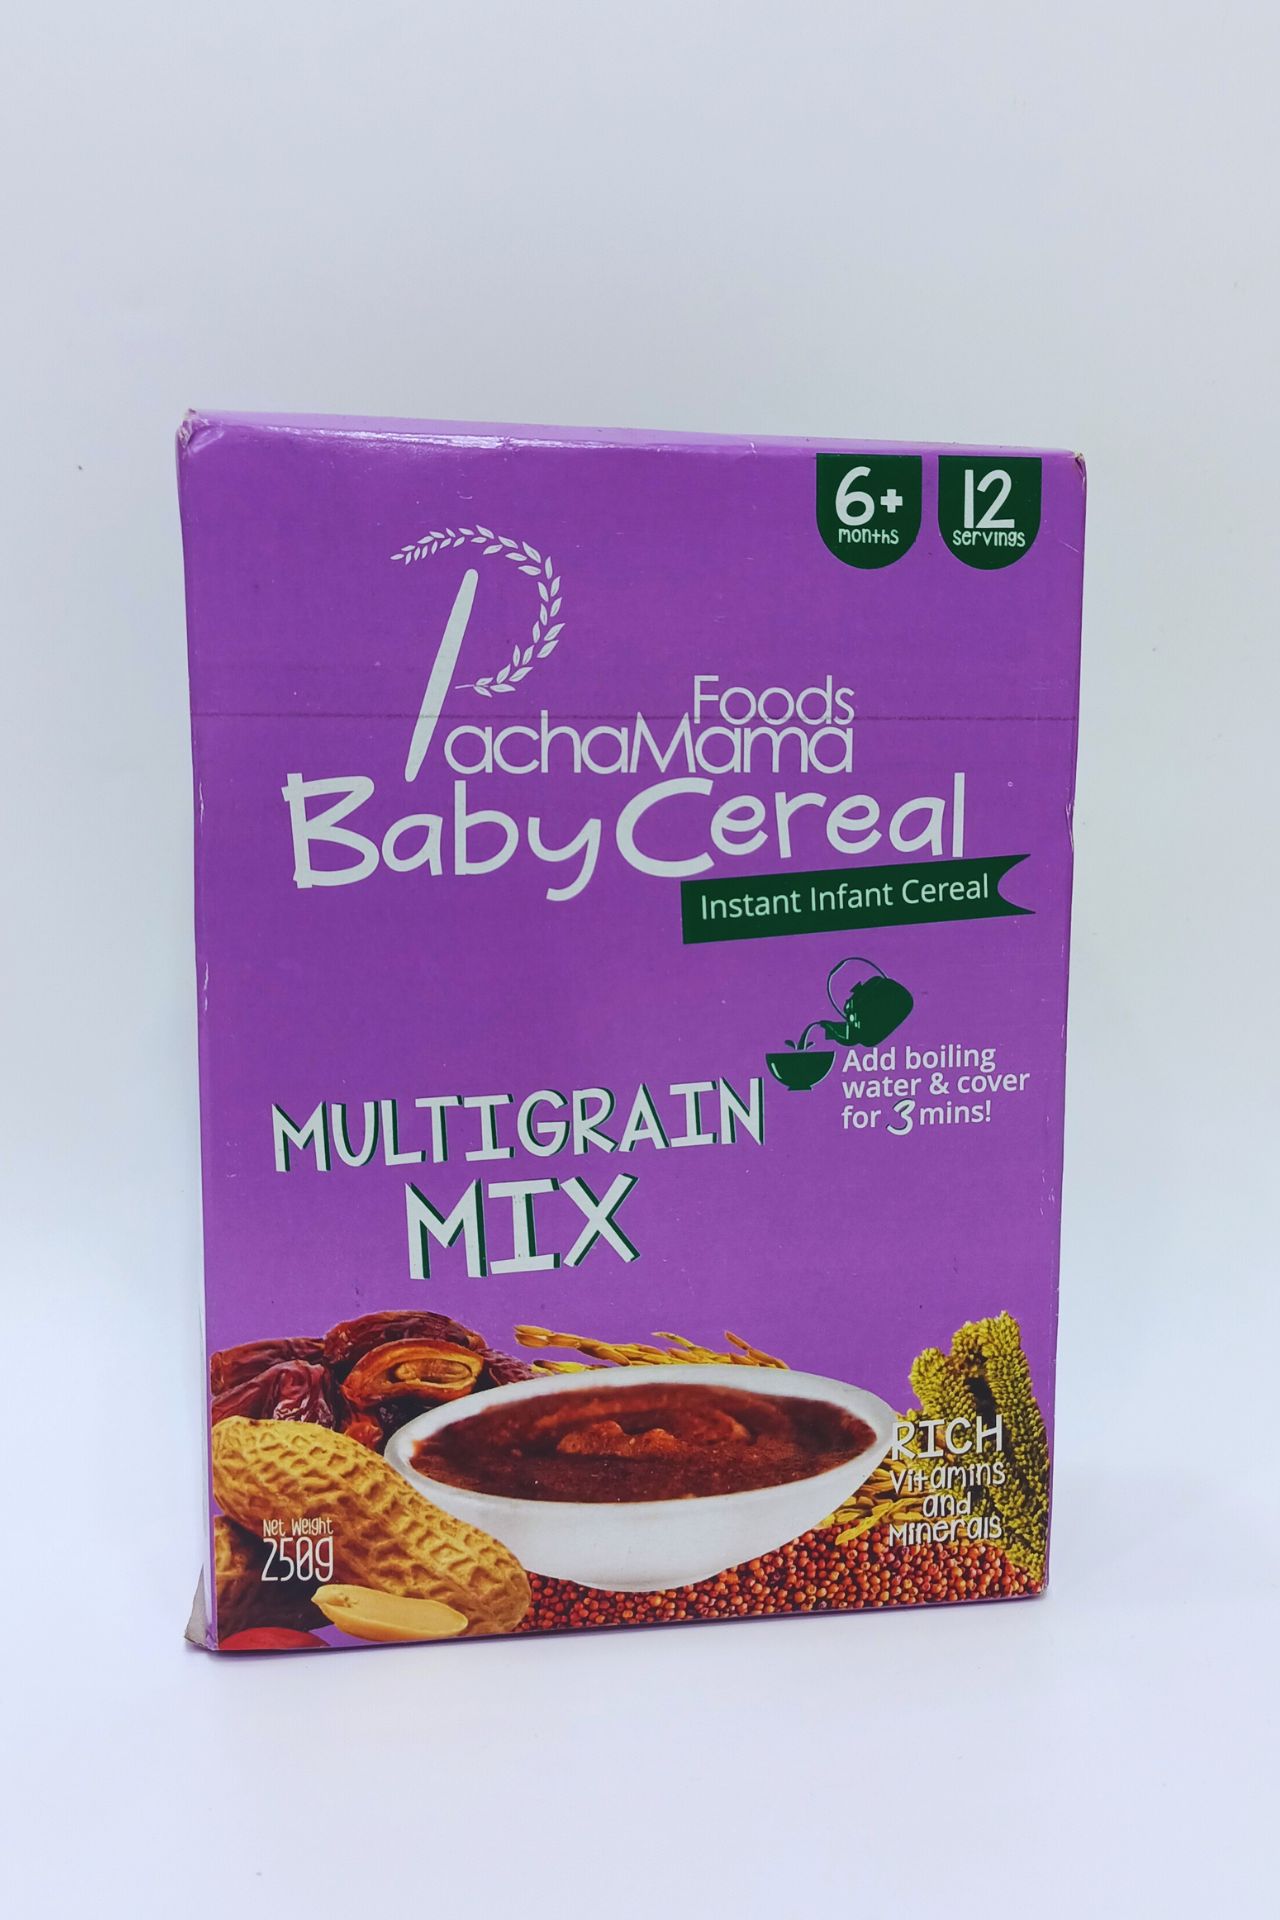 Pachamama baby Cereal - Multigrain Mix